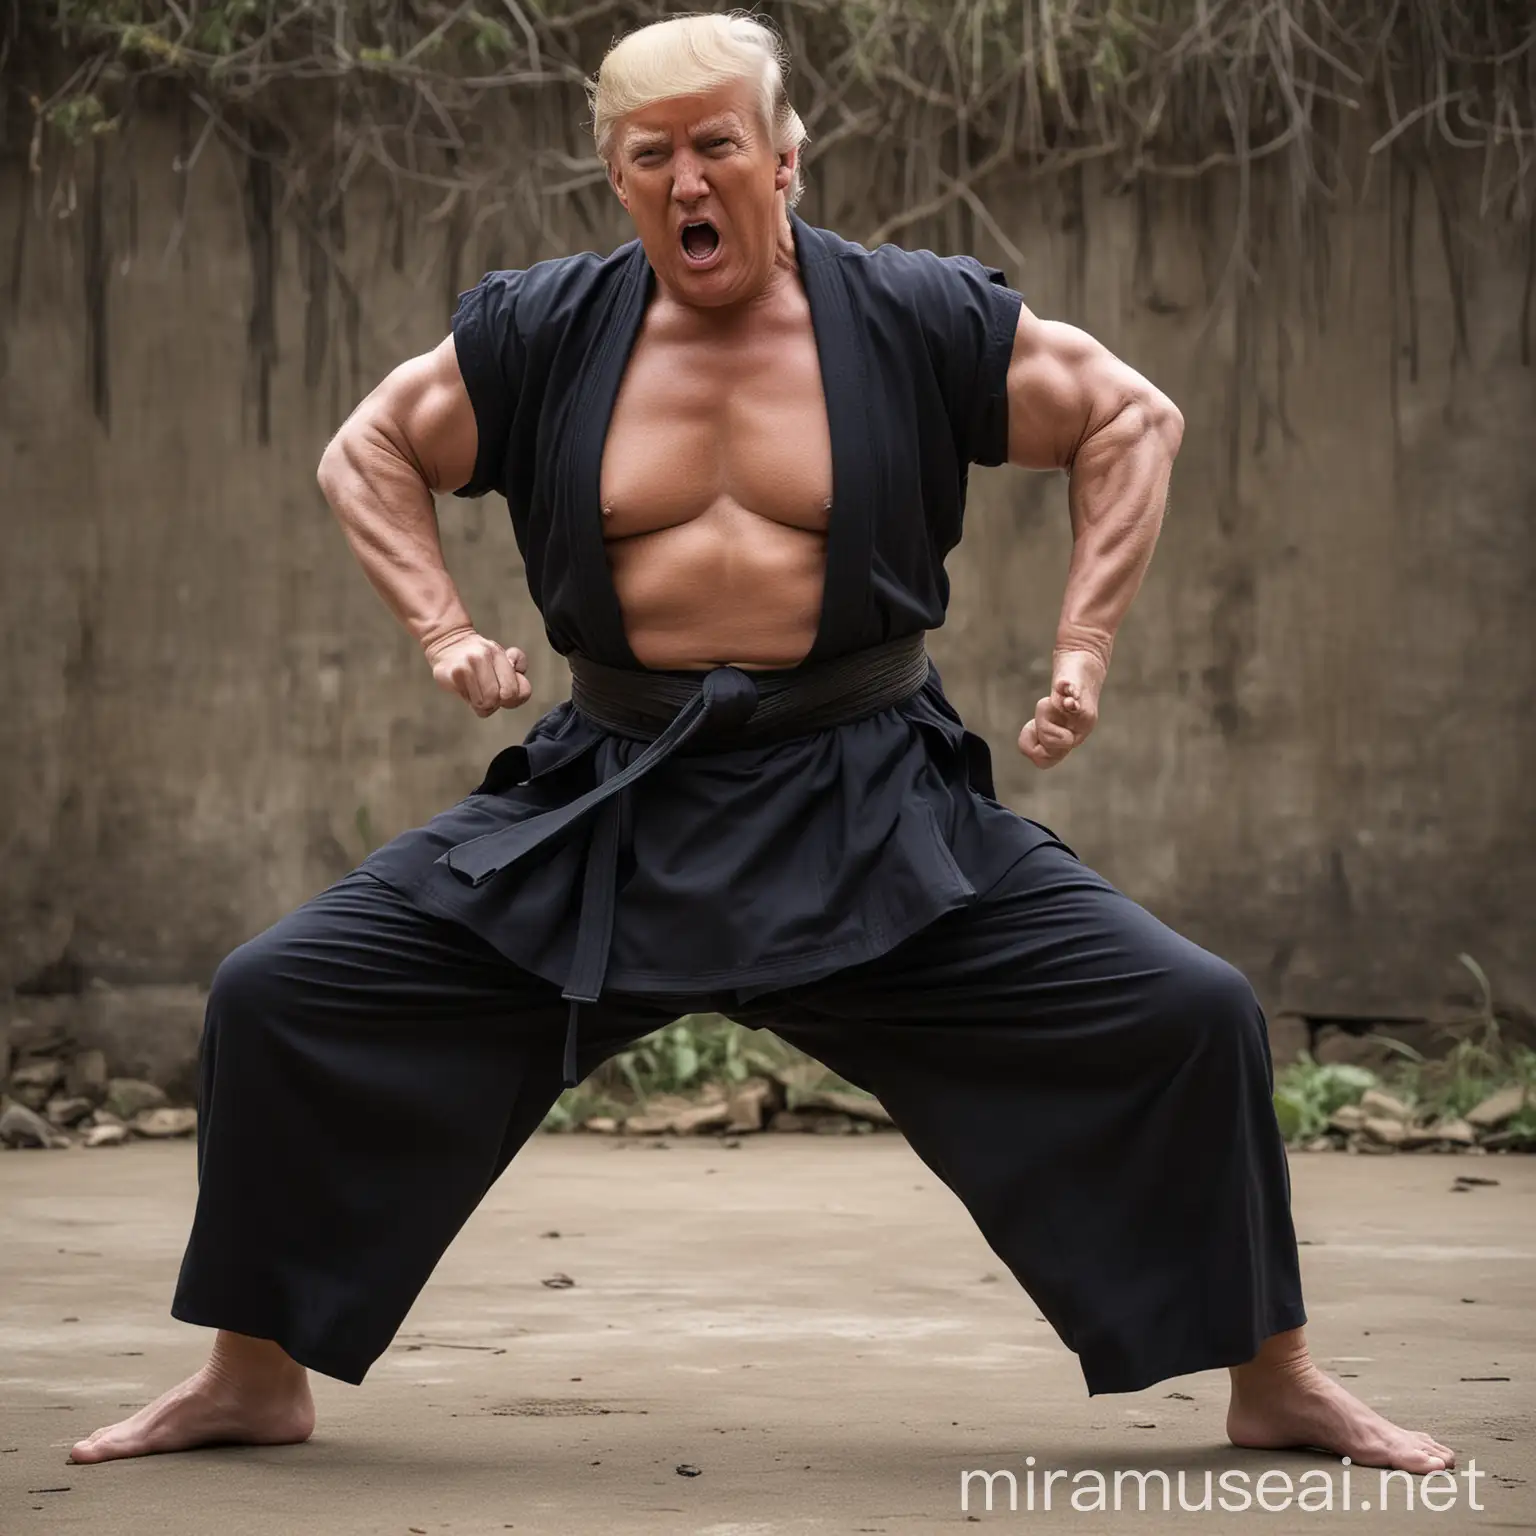 Muscular Donald Trump Strikes Kung Fu Pose with Intensity